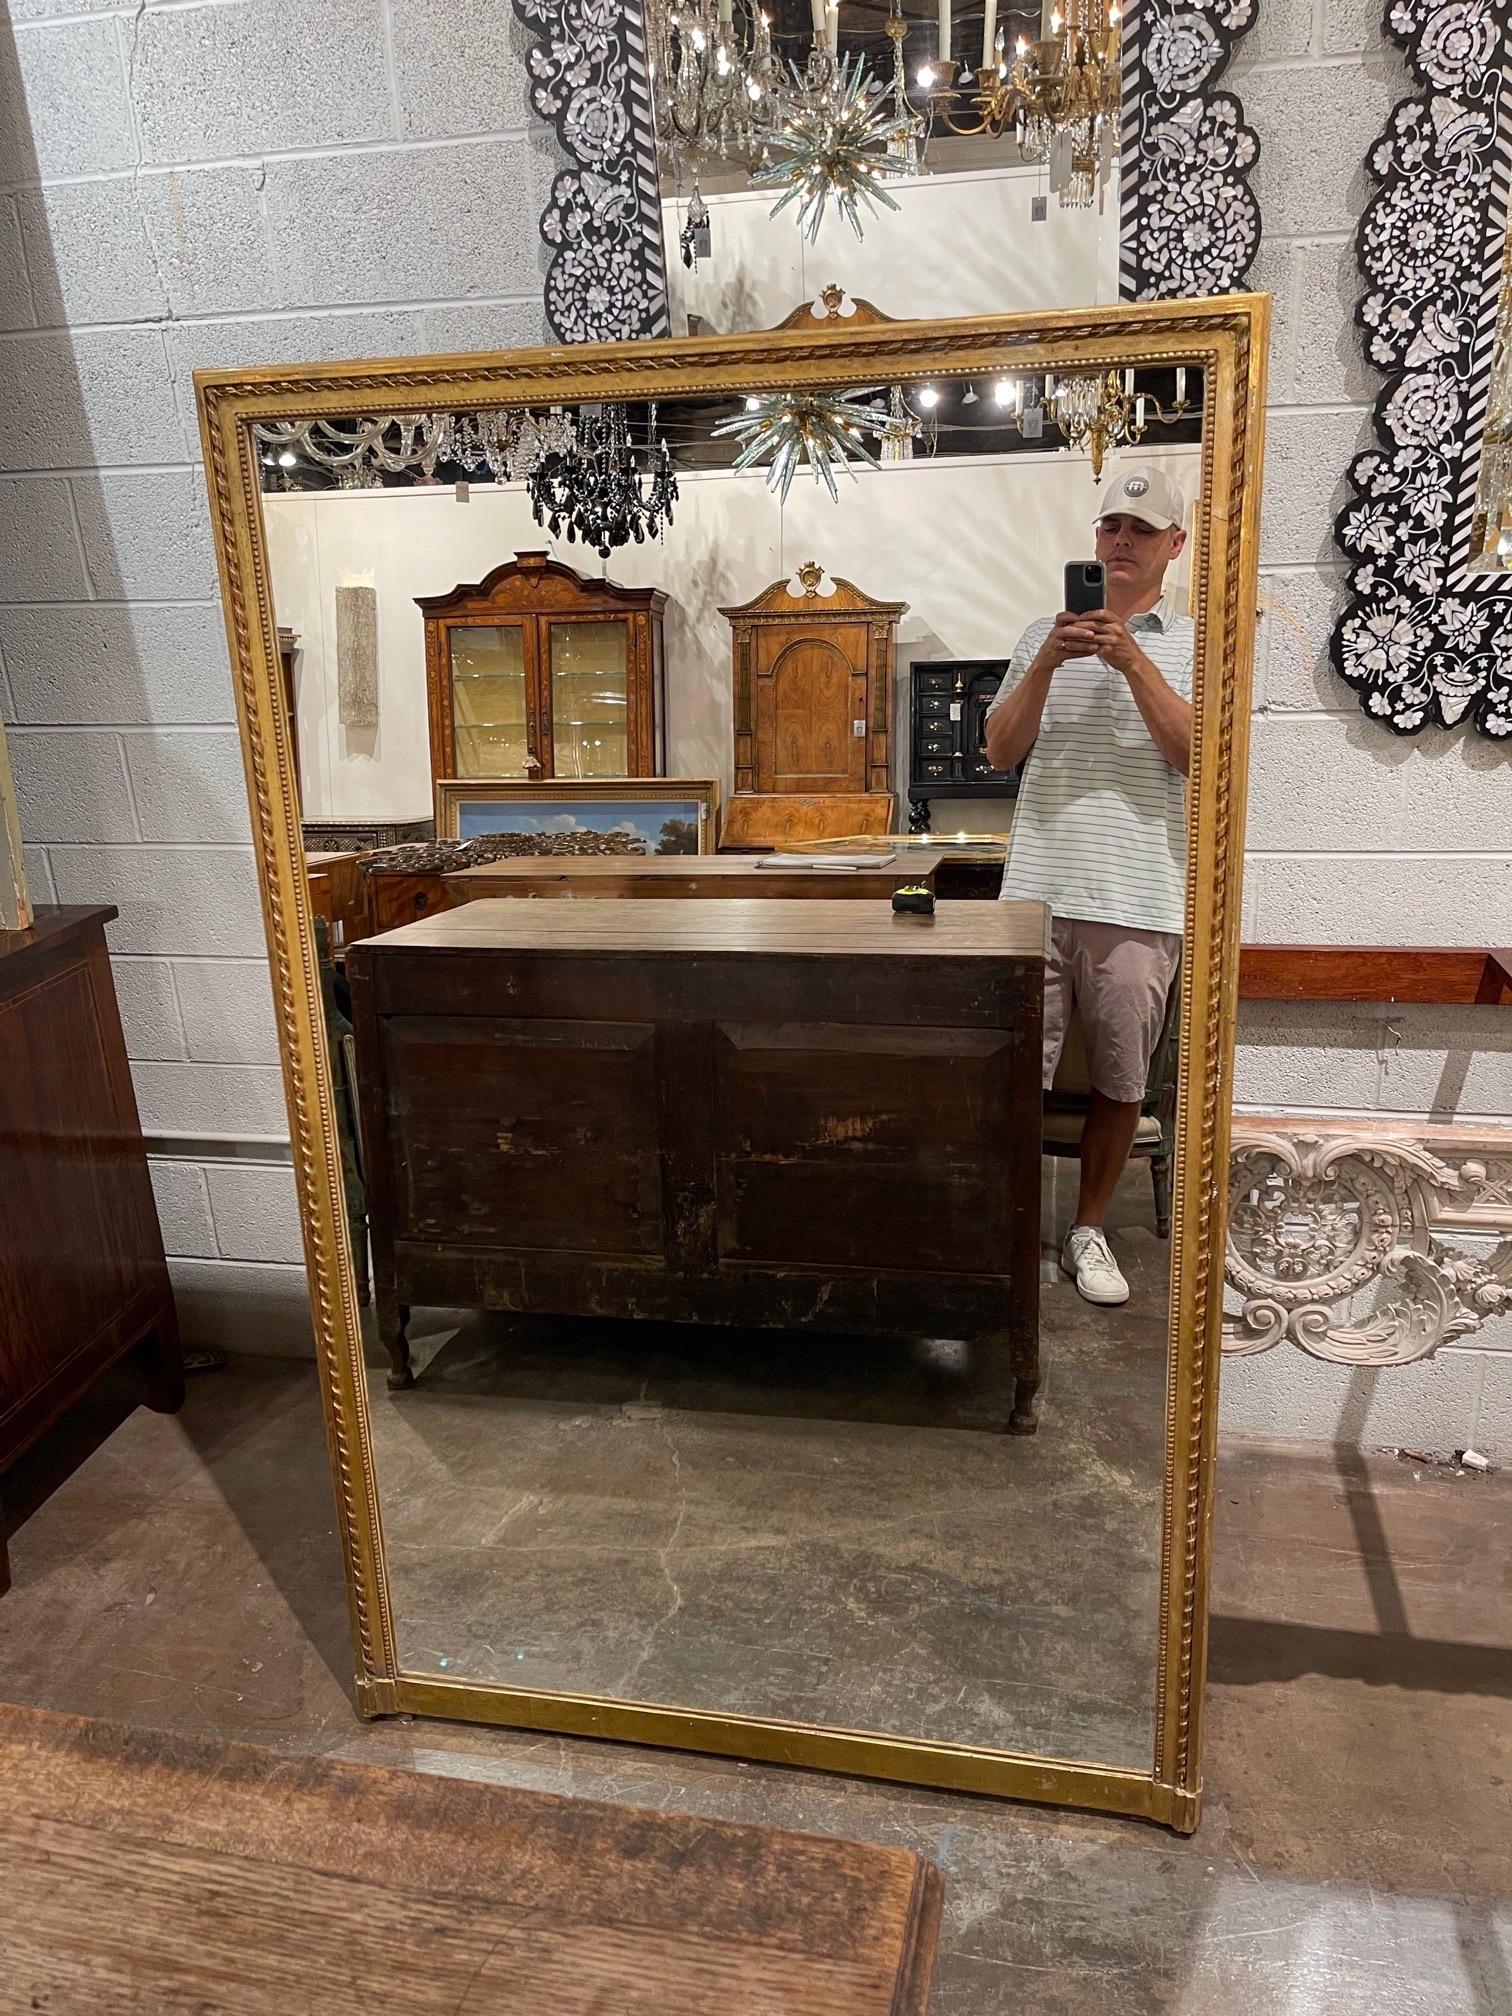 Very fine 19th century French Directoire carved and giltwood mirror. A classic style for a fine home. Great for a variety of decors!